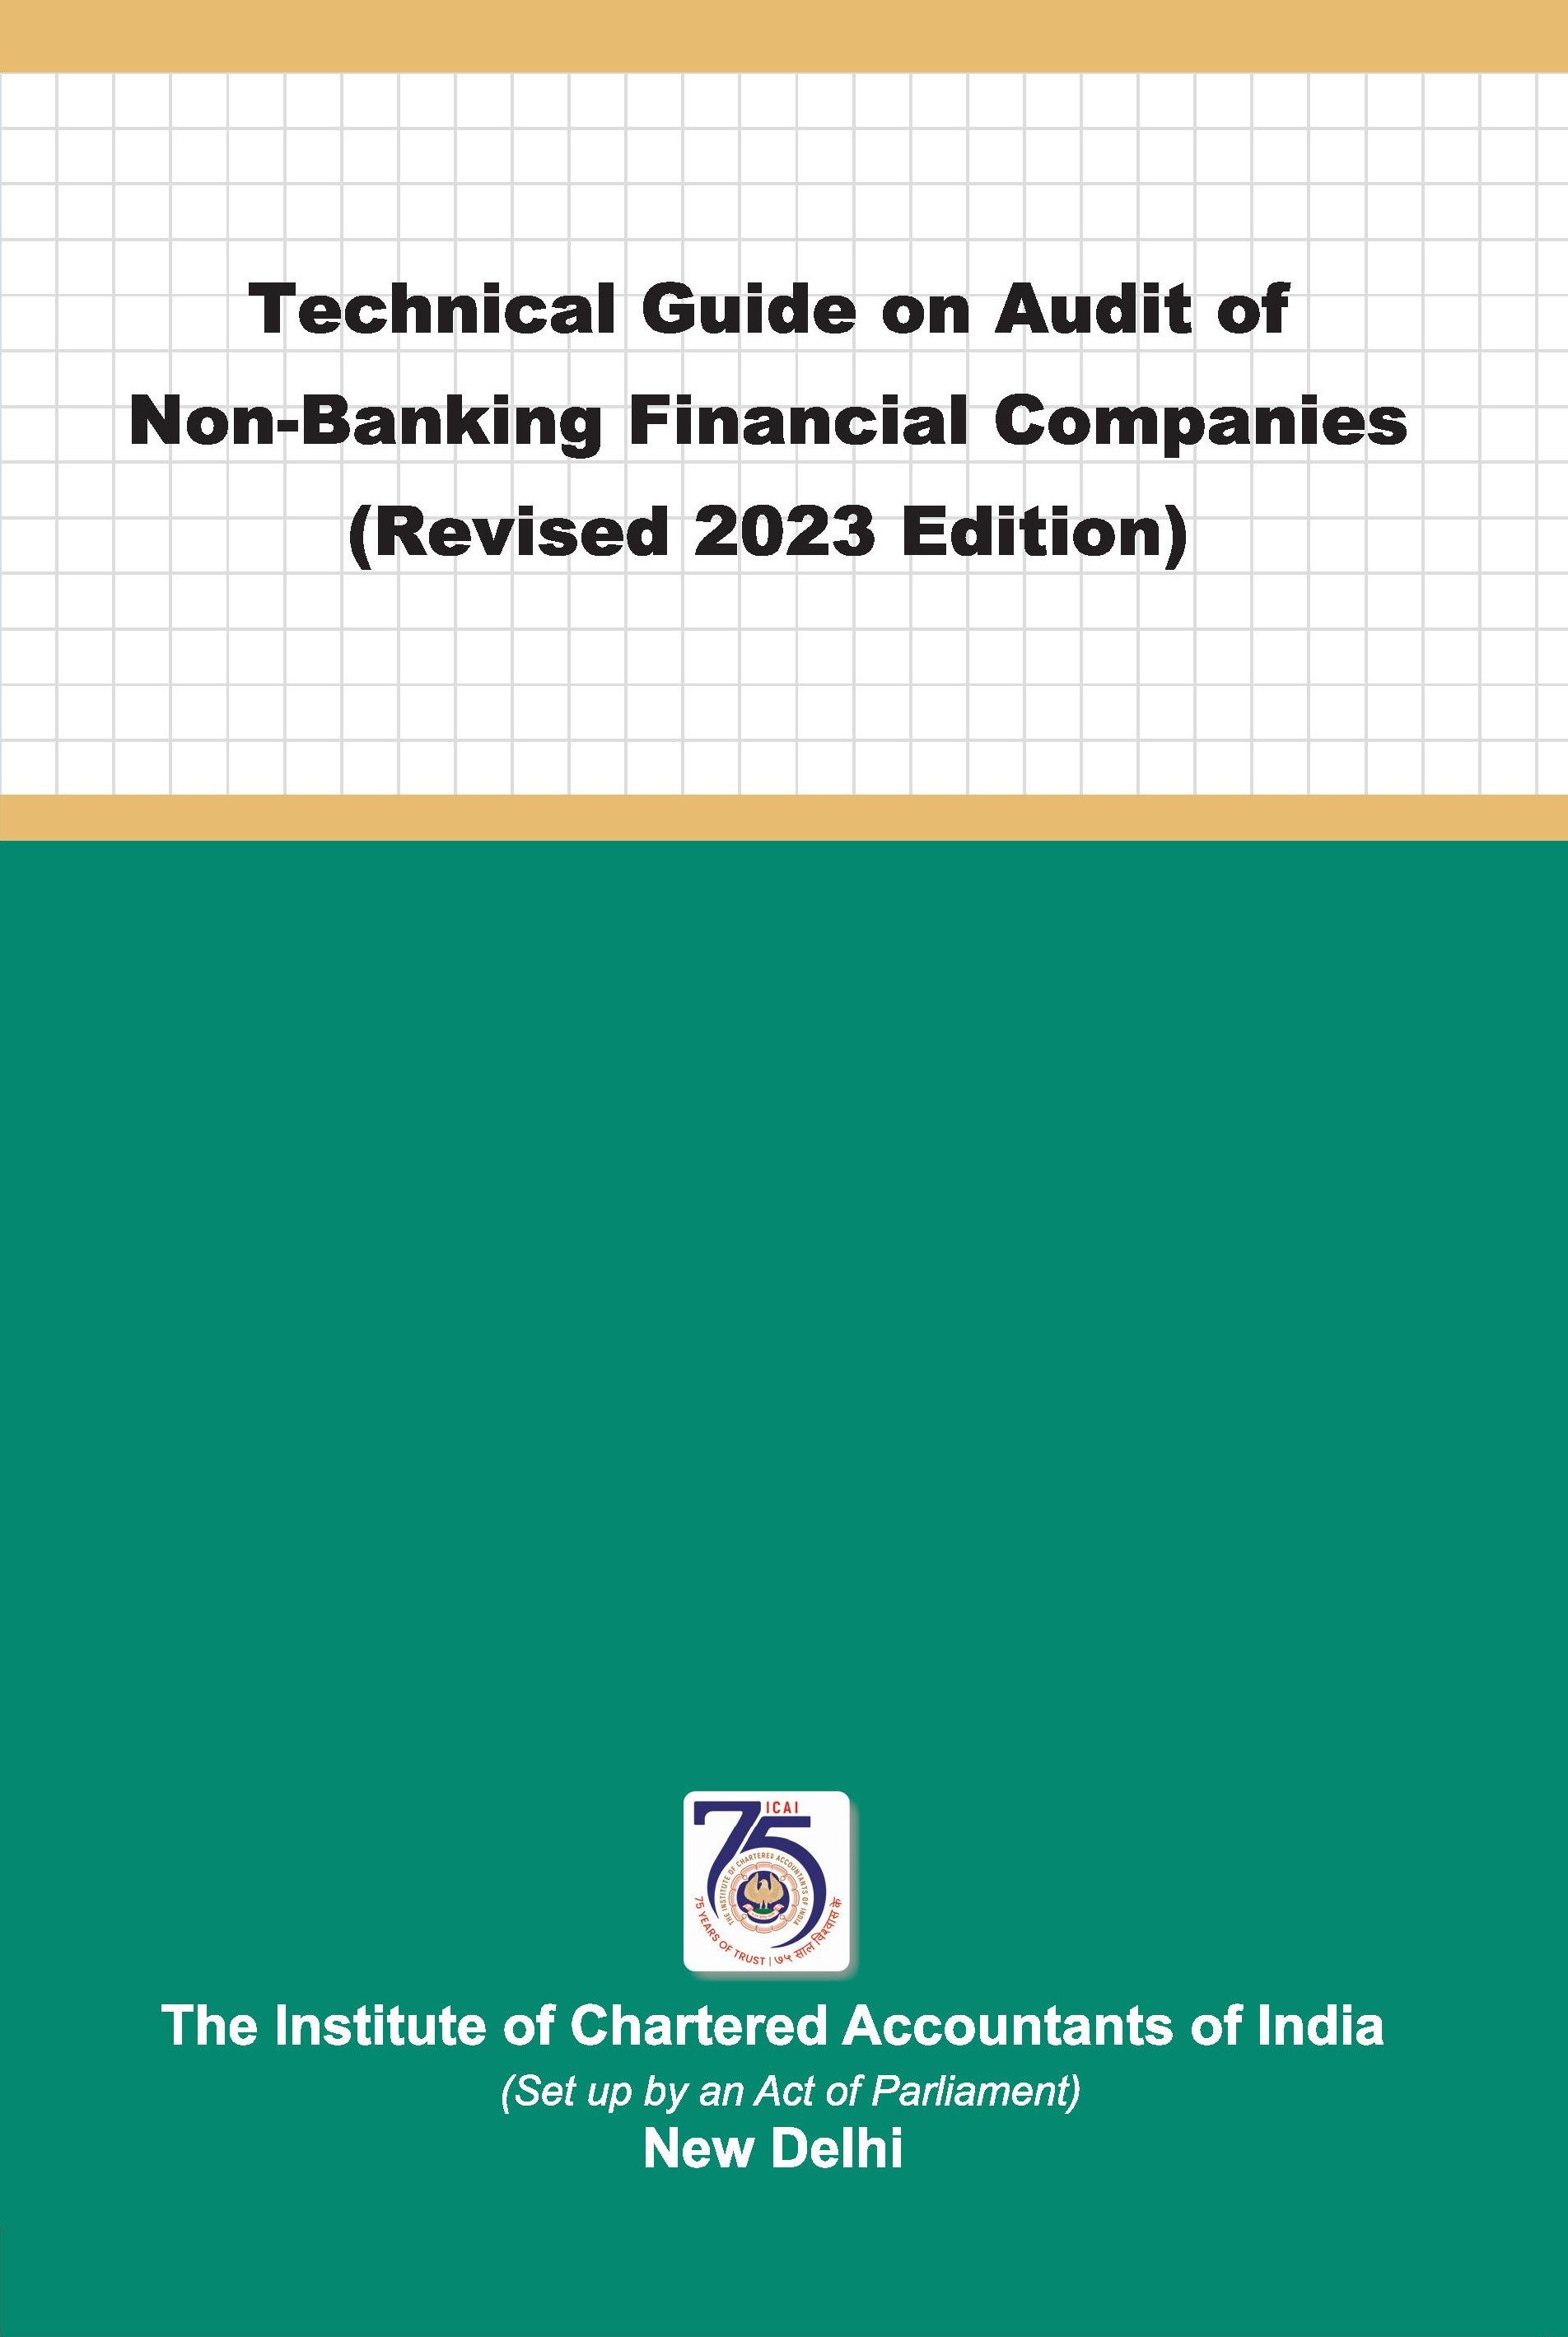 Technical Guide on Audit of Non-Banking Financial Companies (Revised 2023 Edition)